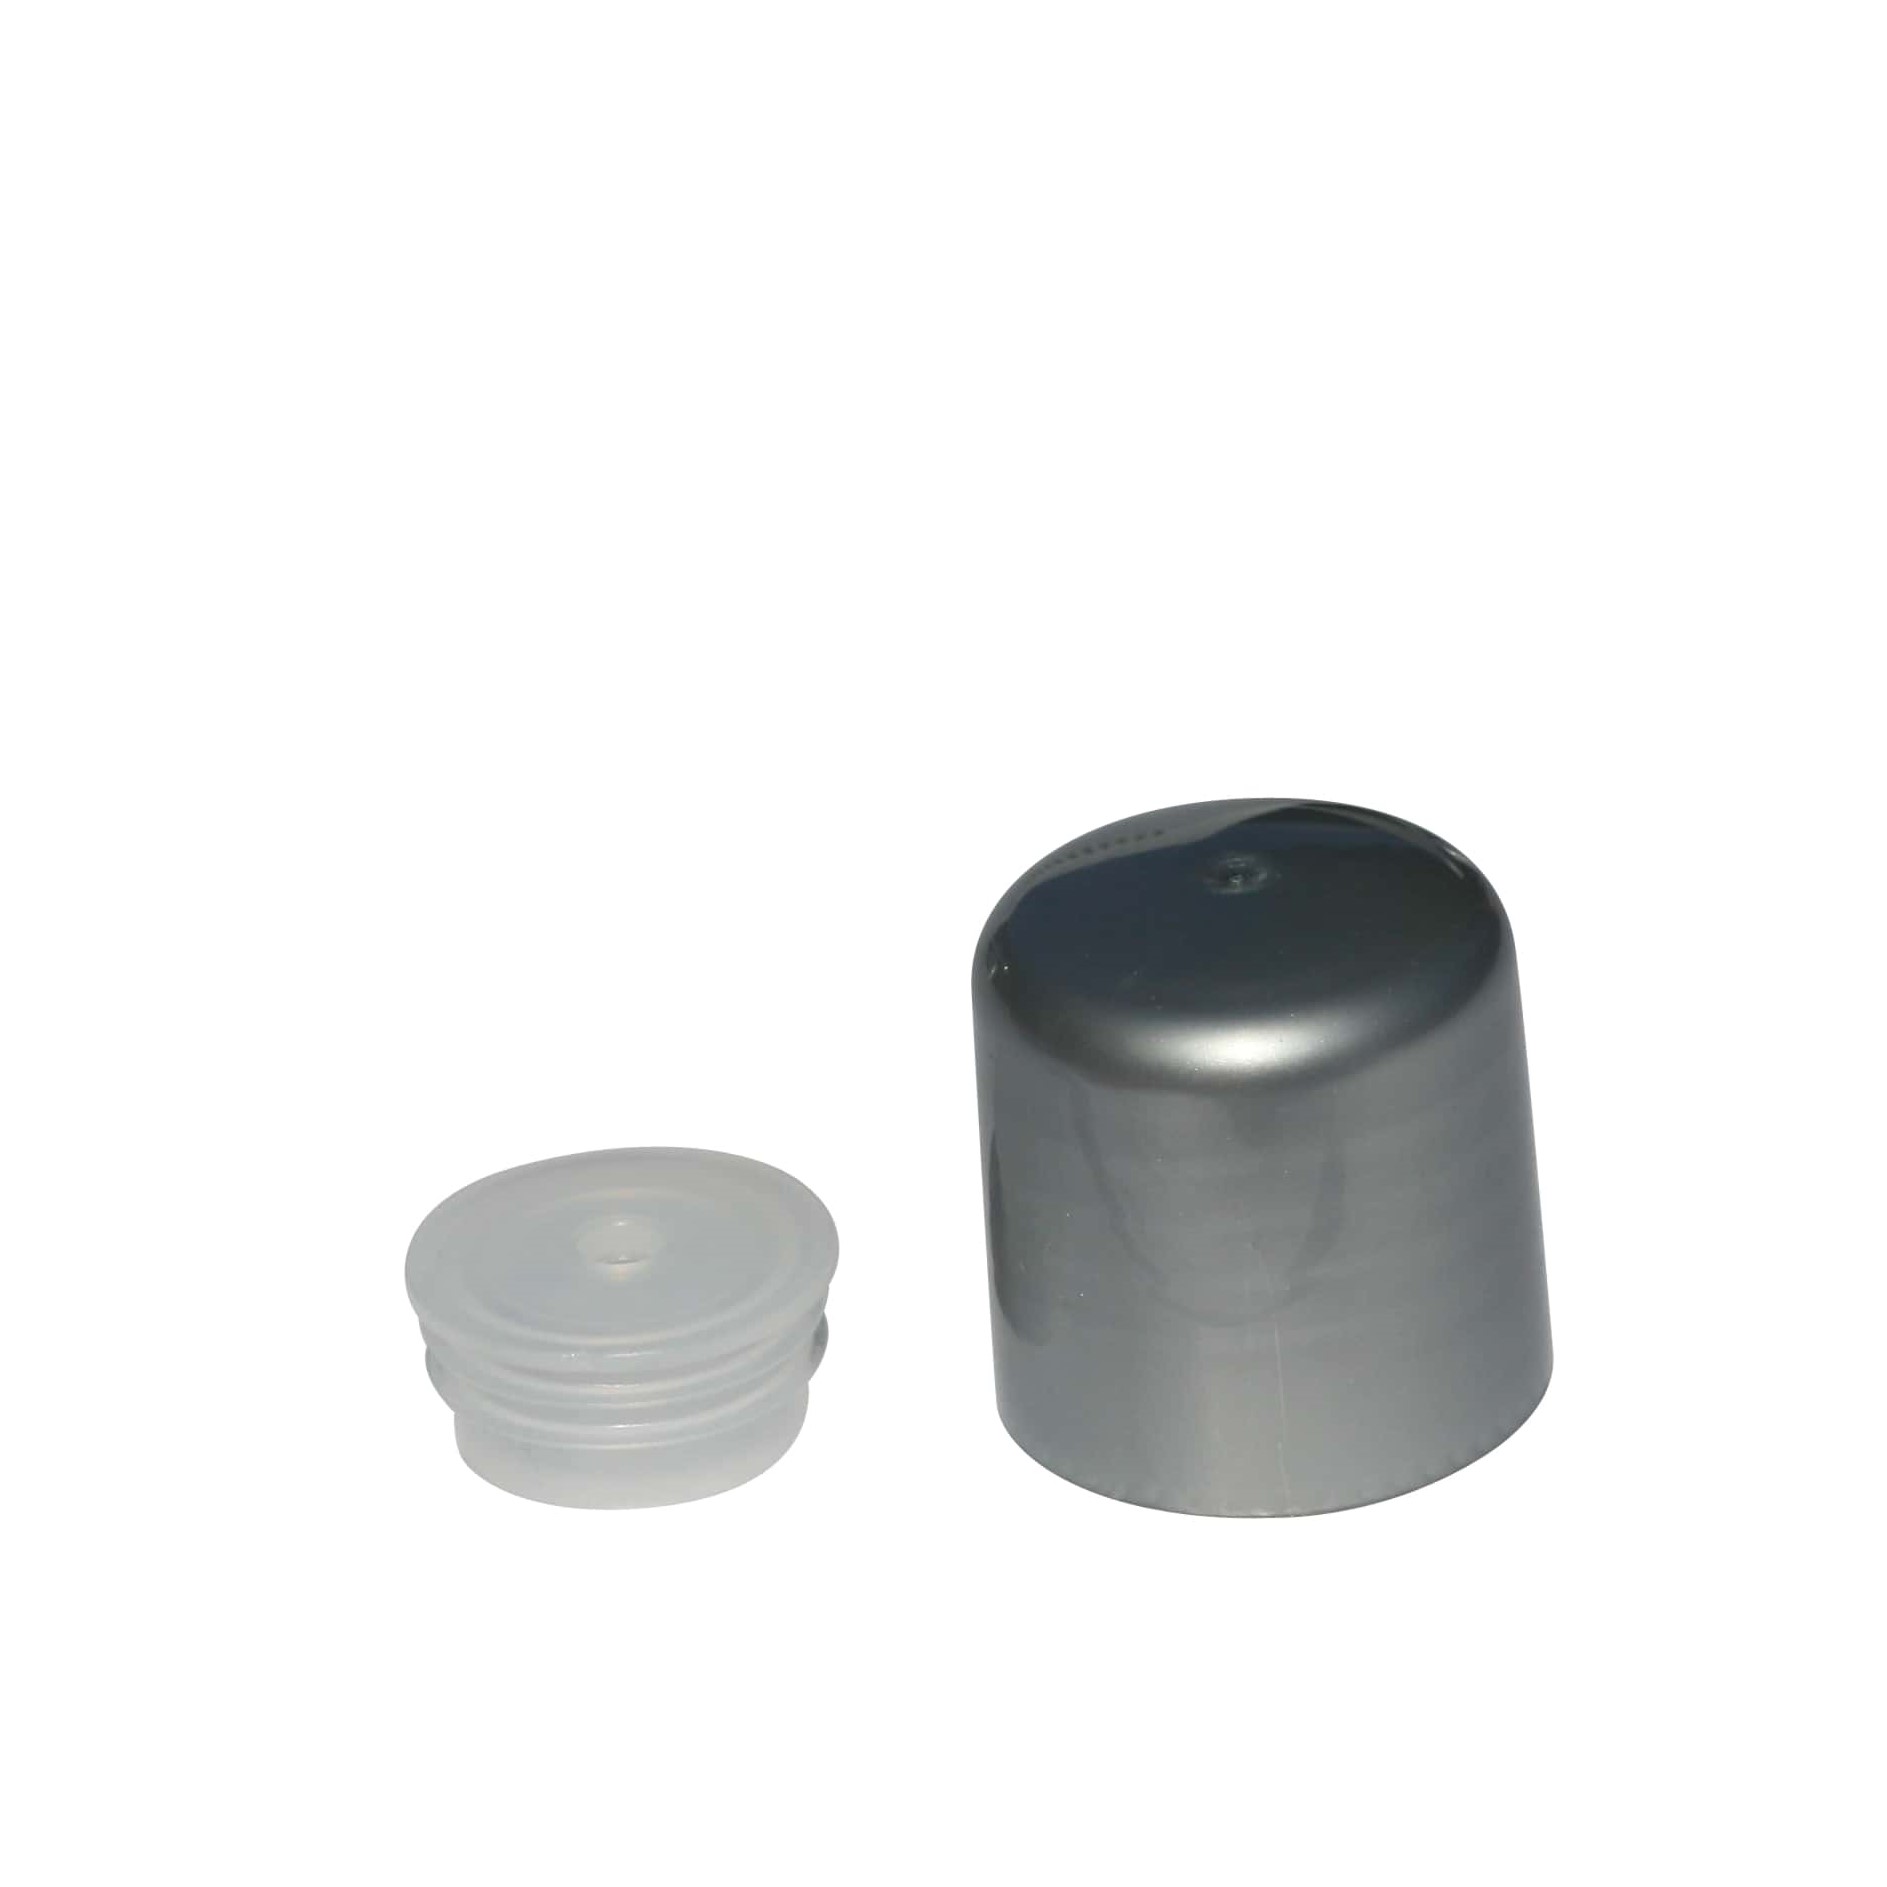 Screw cap with spray insert, PP plastic, silver, for opening: GPI 24/410